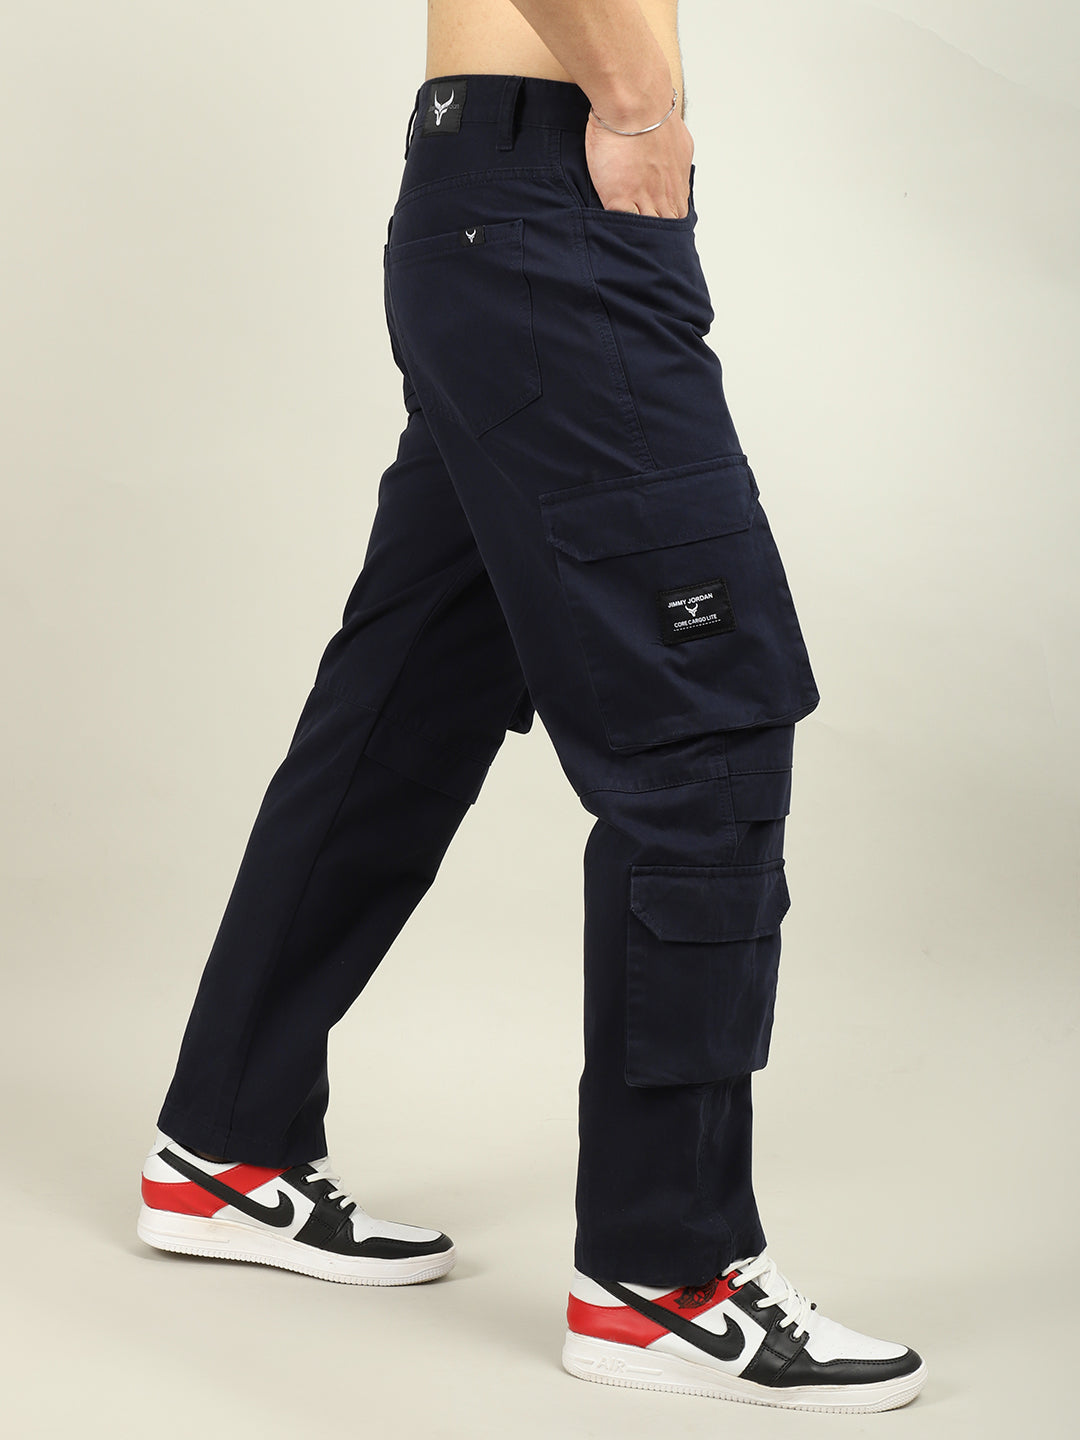 Fire Navy Baggy Fit 8 Pocket Cargo